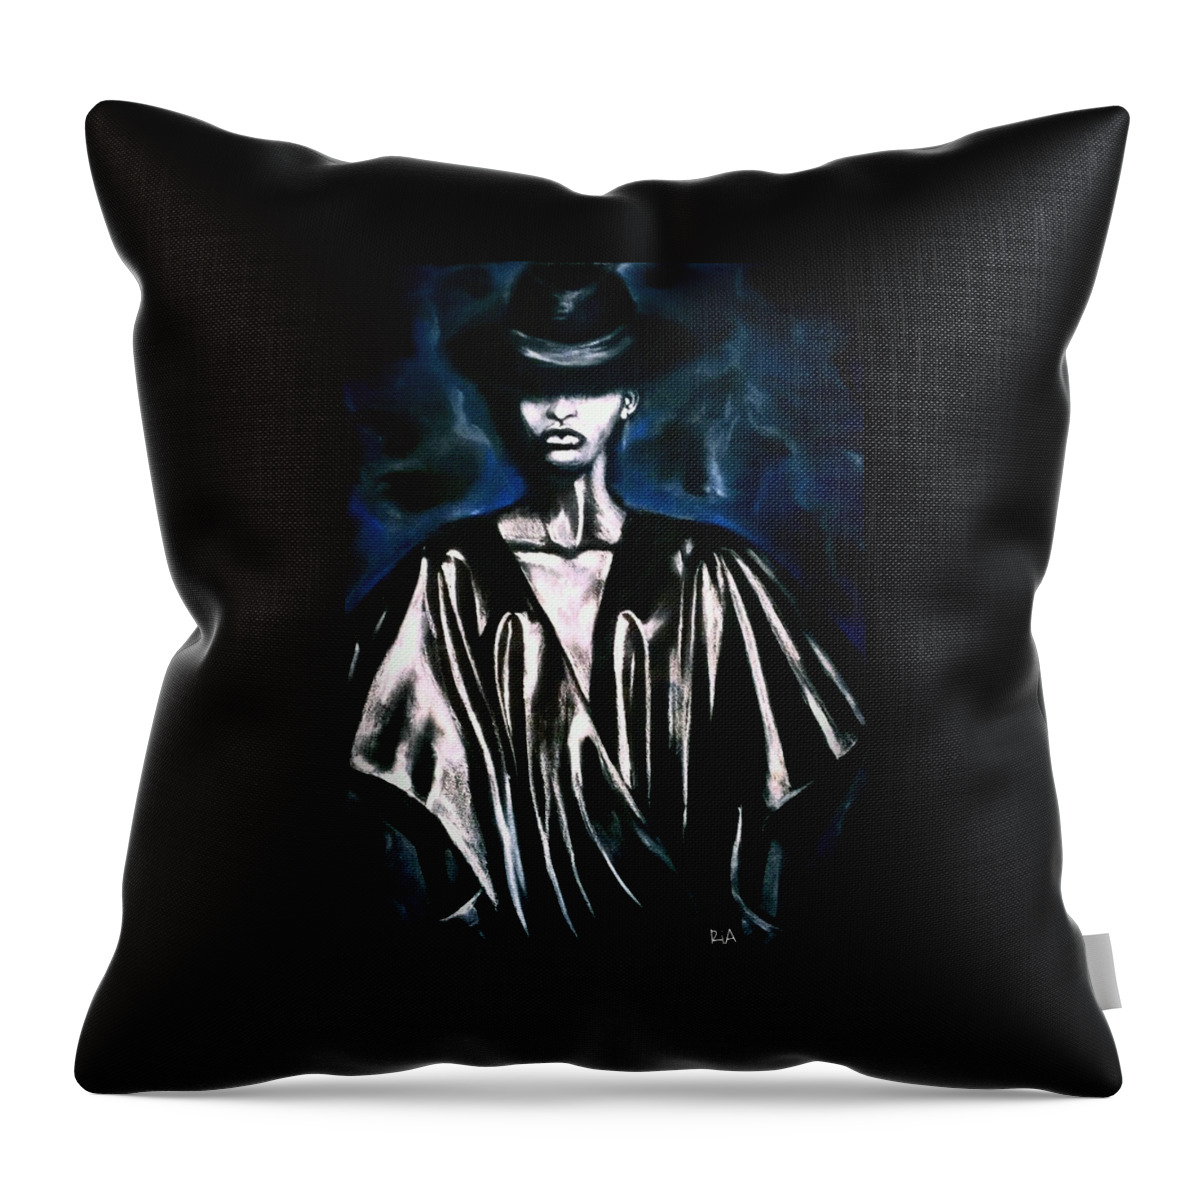 Sexy Throw Pillow featuring the photograph Smooth Criminal by Artist RiA